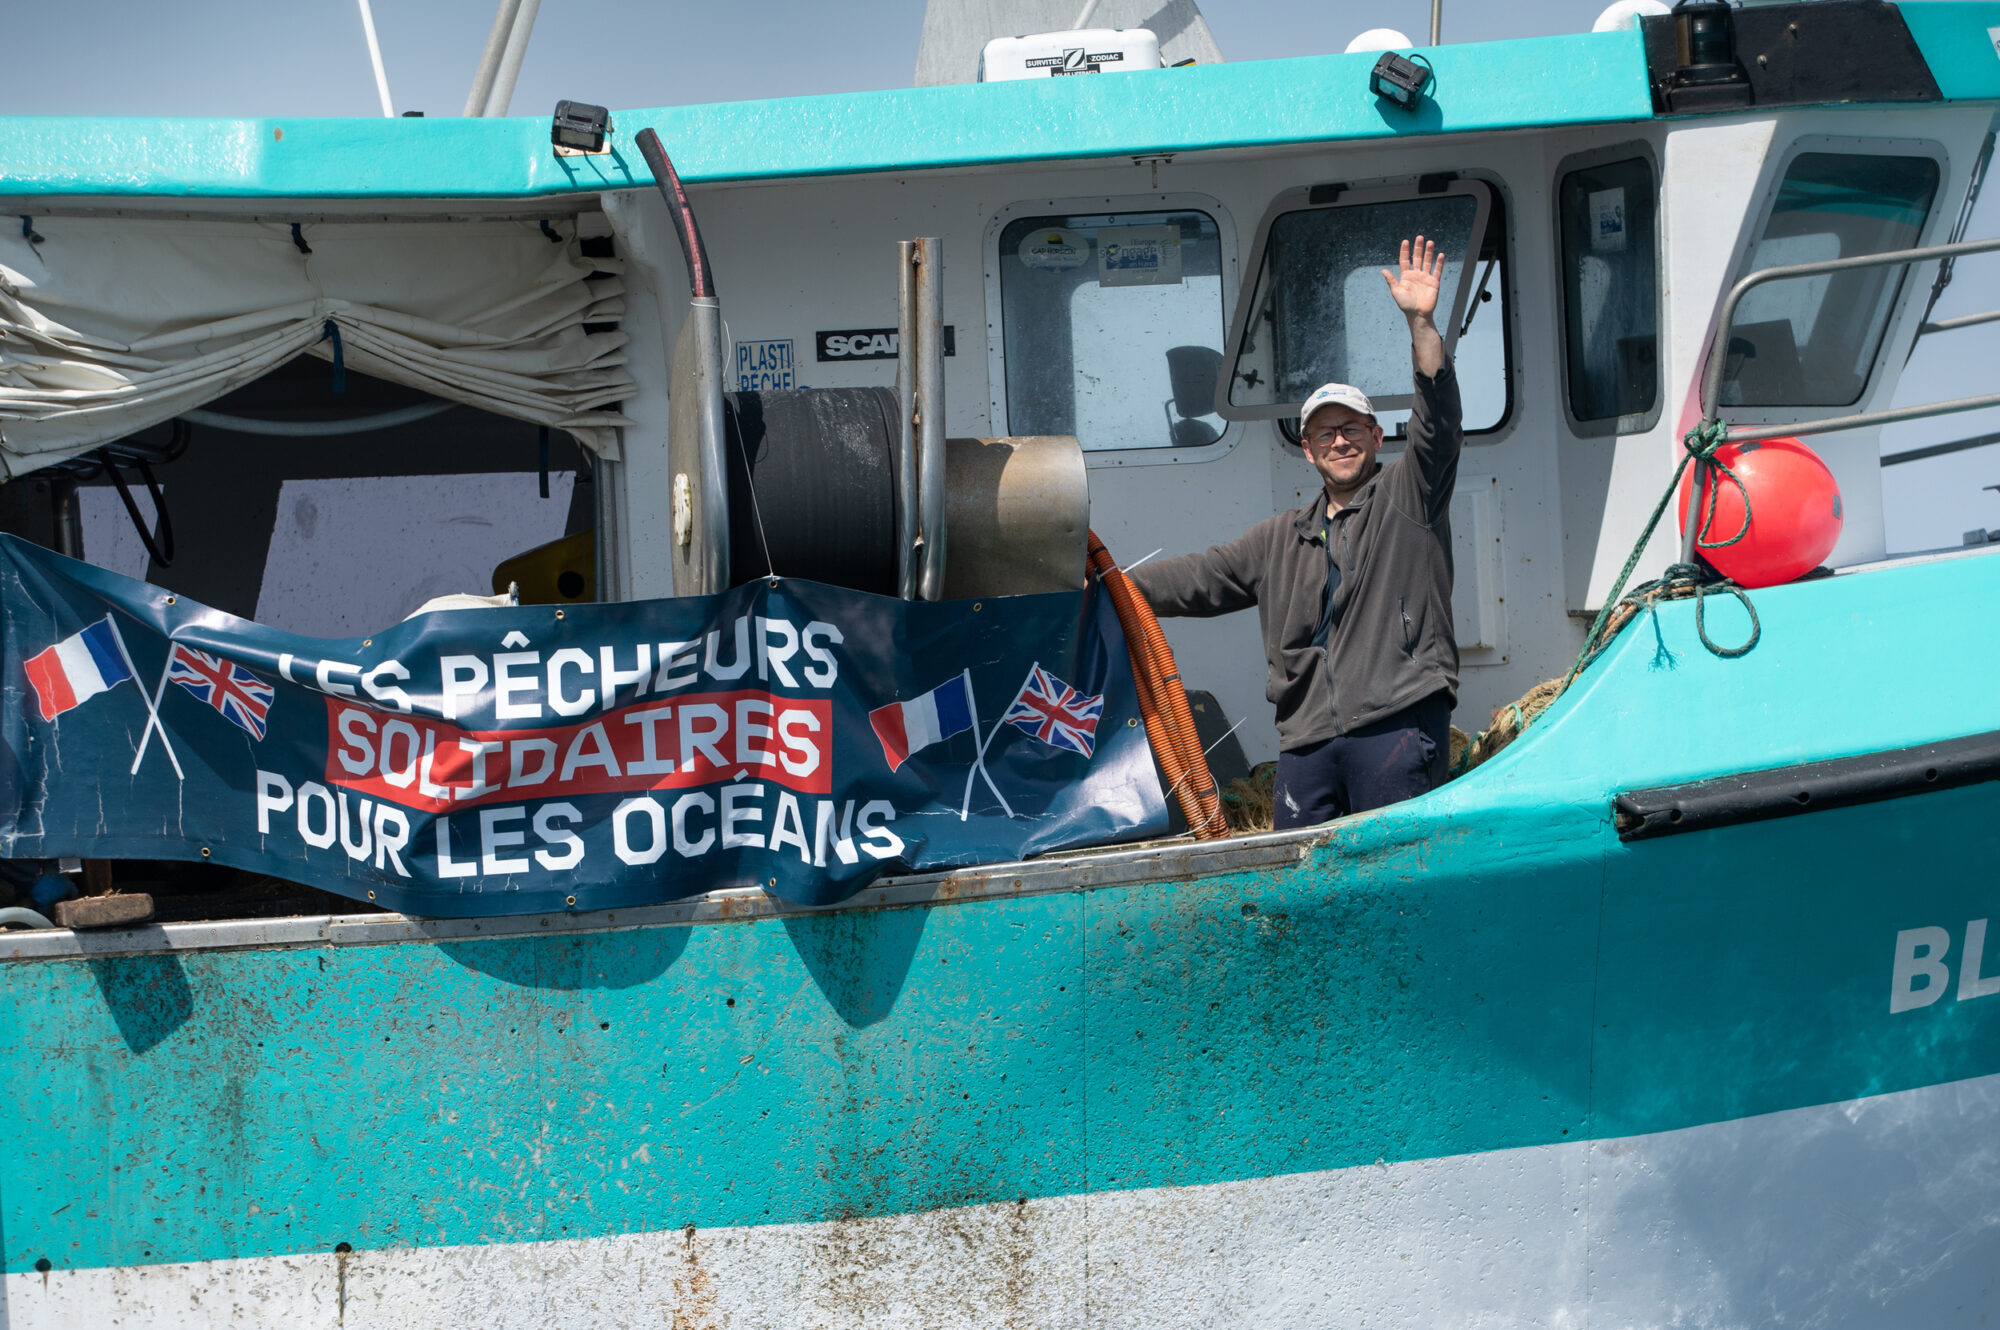 French fisherman on his boat with a banner that says "Les pêcheurs solidaires pour les oceans". In English this means "Fishermen solidarity for the oceans"